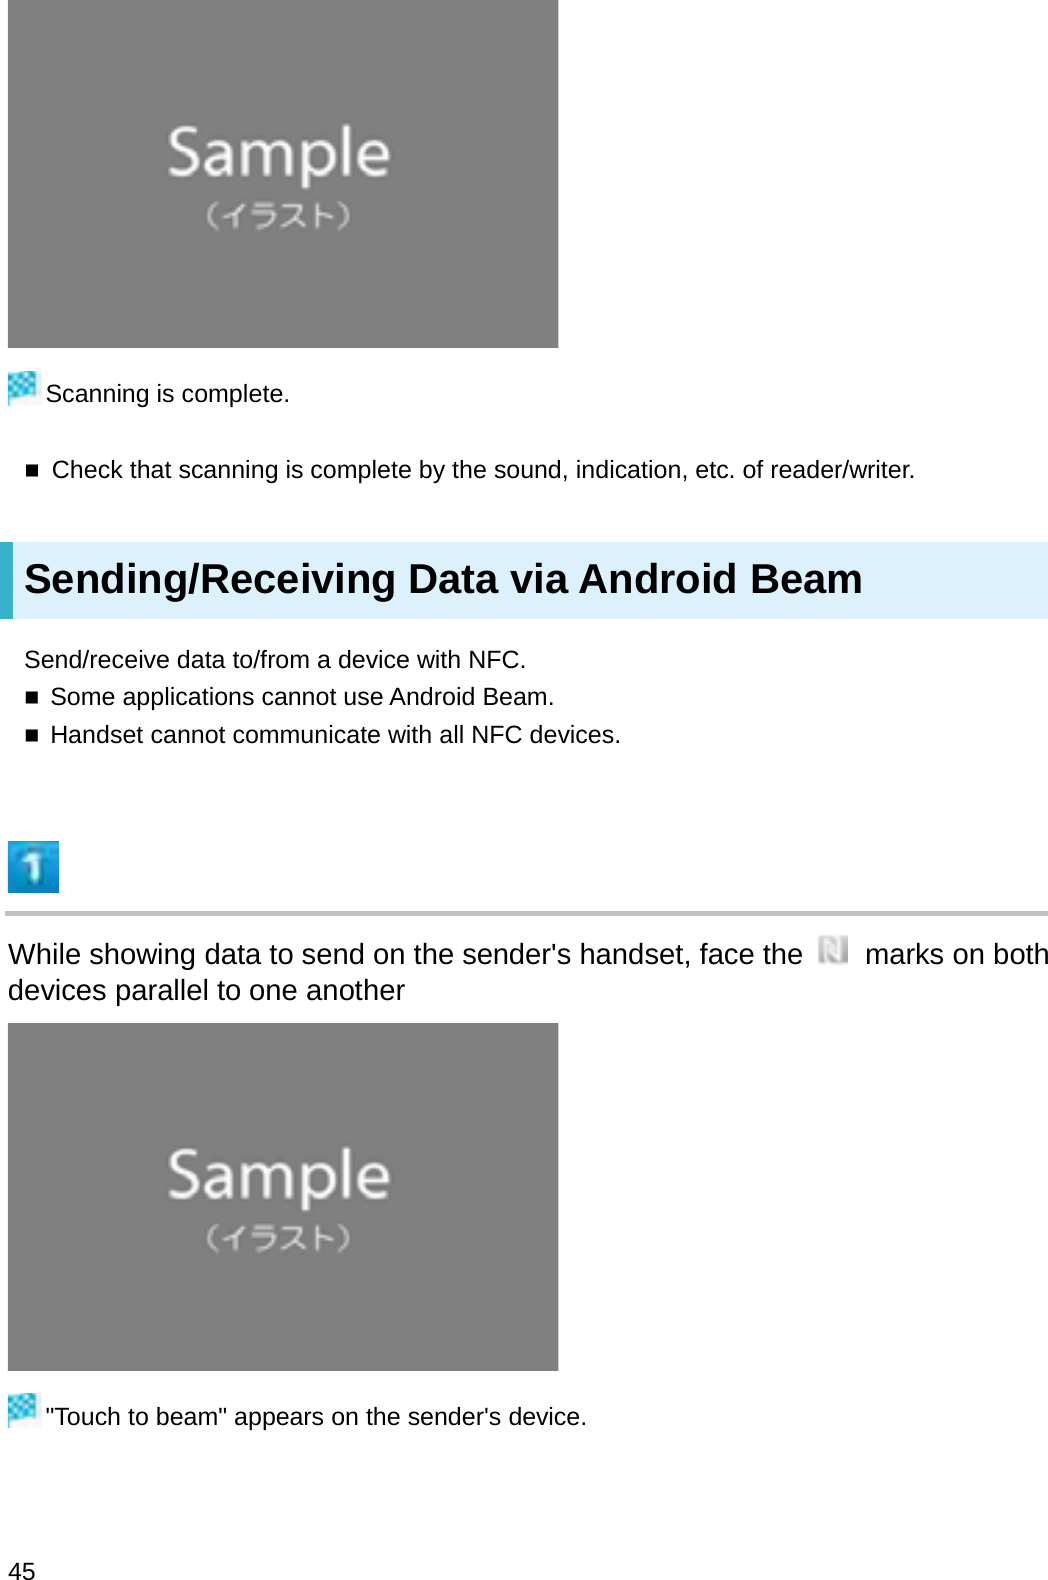 Scanning is complete.Check that scanning is complete by the sound, indication, etc. of reader/writer.Sending/Receiving Data via Android BeamSend/receive data to/from a device with NFC.Some applications cannot use Android Beam.Handset cannot communicate with all NFC devices.While showing data to send on the sender&apos;s handset, face the  marks on both devices parallel to one another&quot;Touch to beam&quot; appears on the sender&apos;s device.45